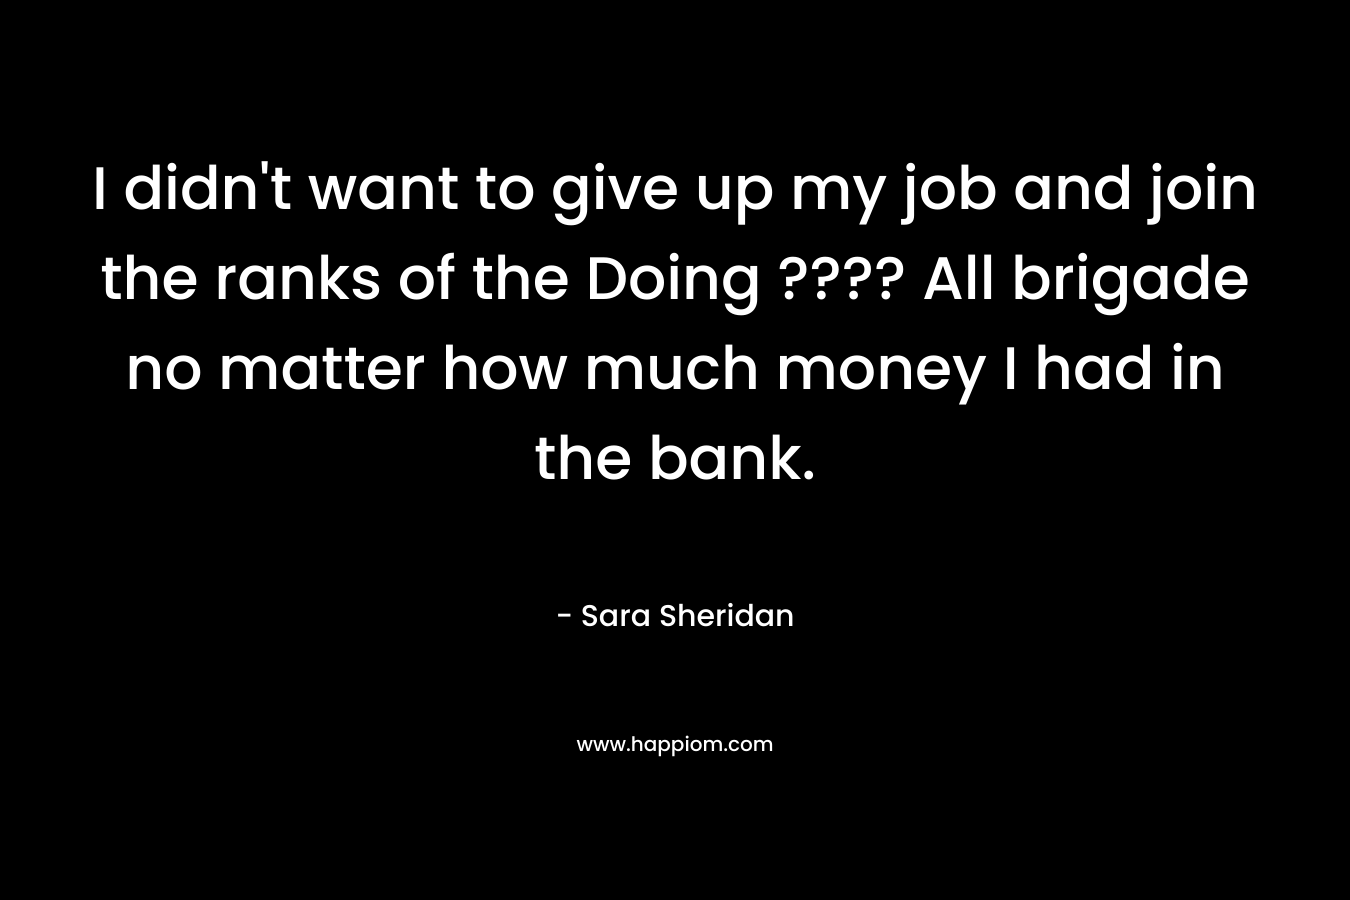 I didn’t want to give up my job and join the ranks of the Doing ???? All brigade no matter how much money I had in the bank. – Sara Sheridan